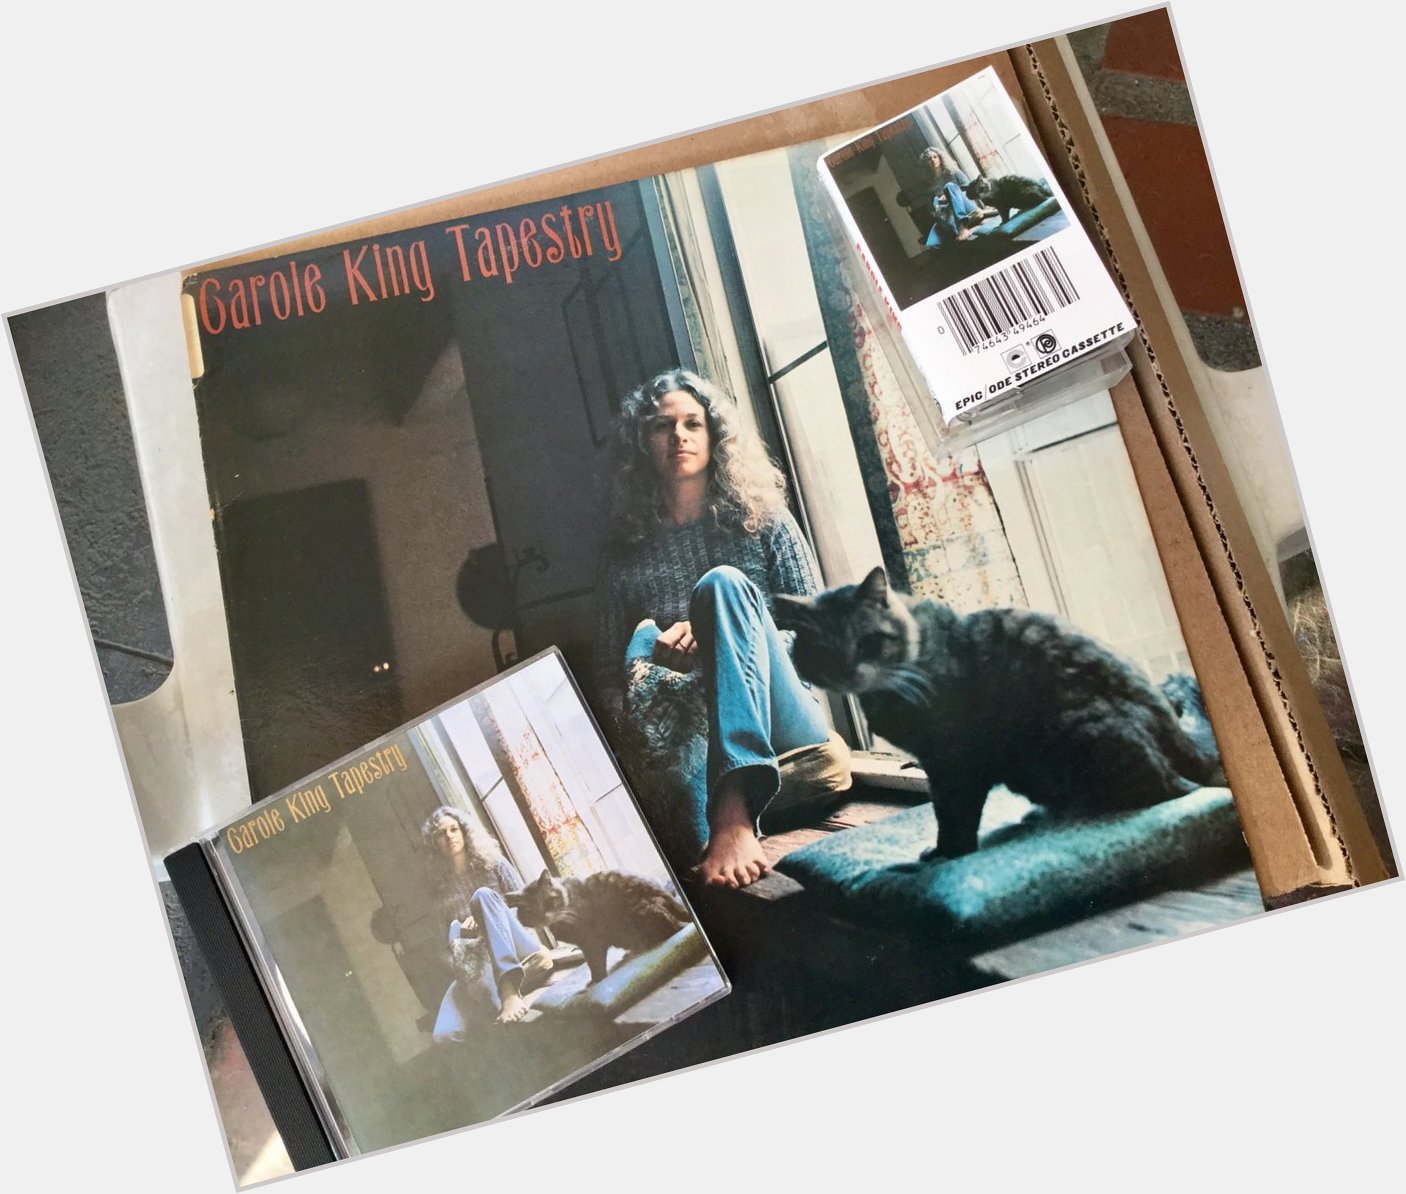 Happy Birthday, Carole King. Thanks for the gift of your music and this all-time great album, Tapestry. 